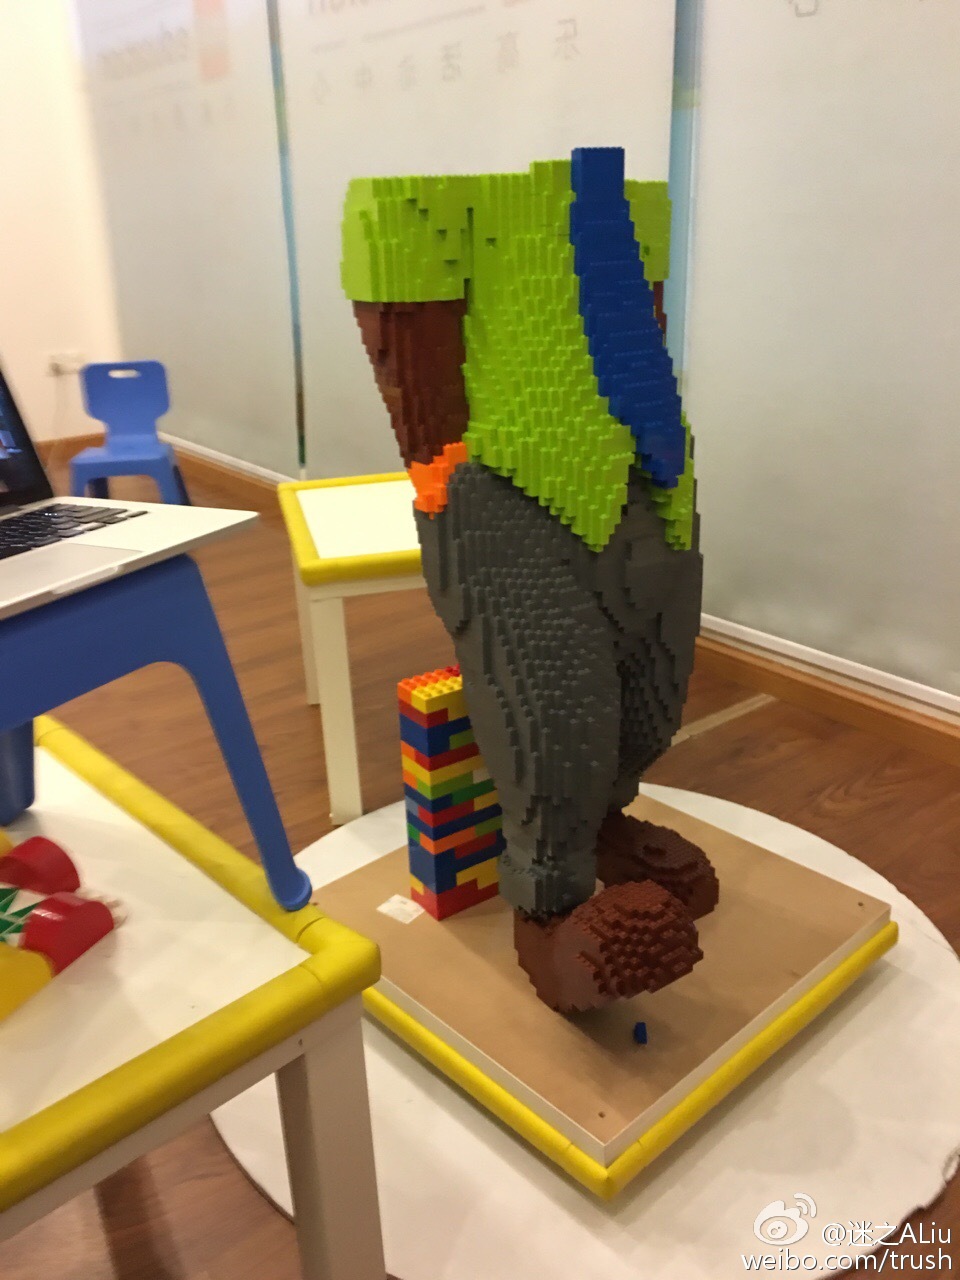 Man Spends Days Making Zootopia LEGO Statue, Child Destroys It In Seconds